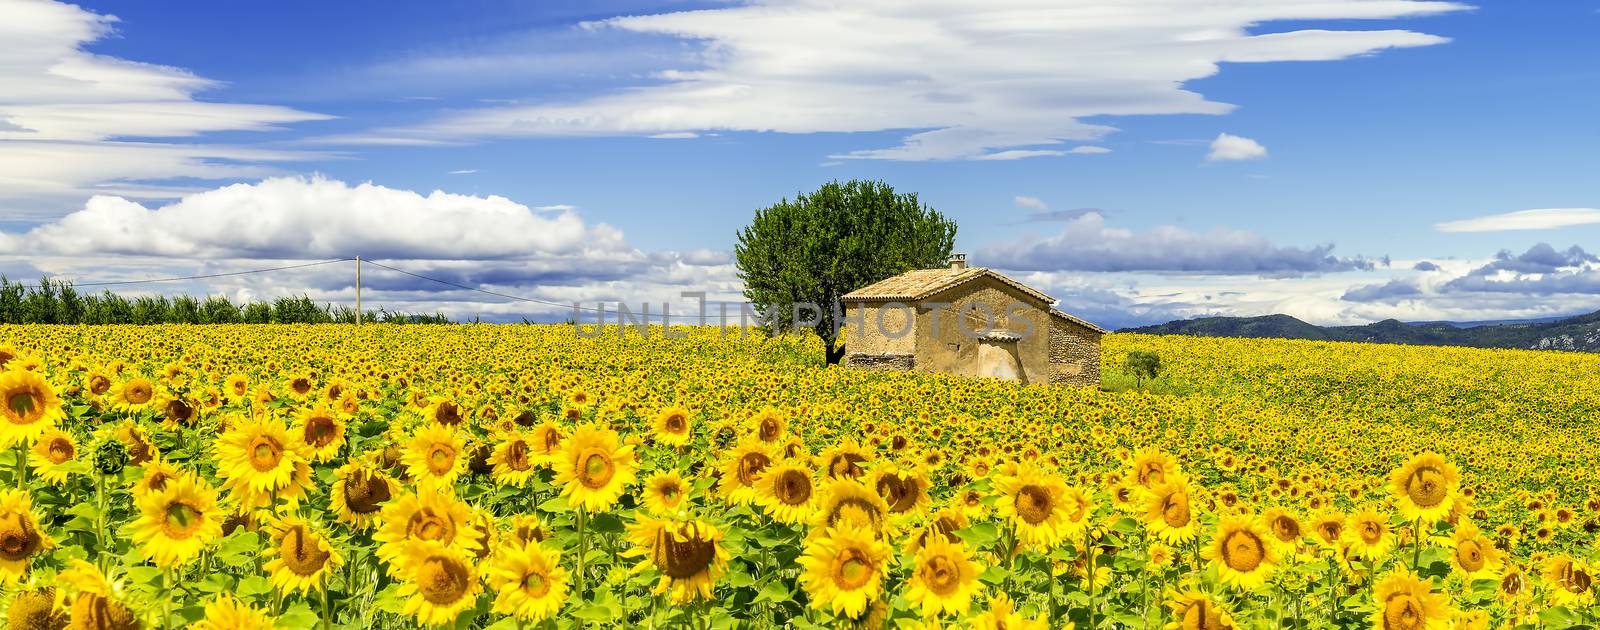 sunflower field over cloudy blue sky by ventdusud